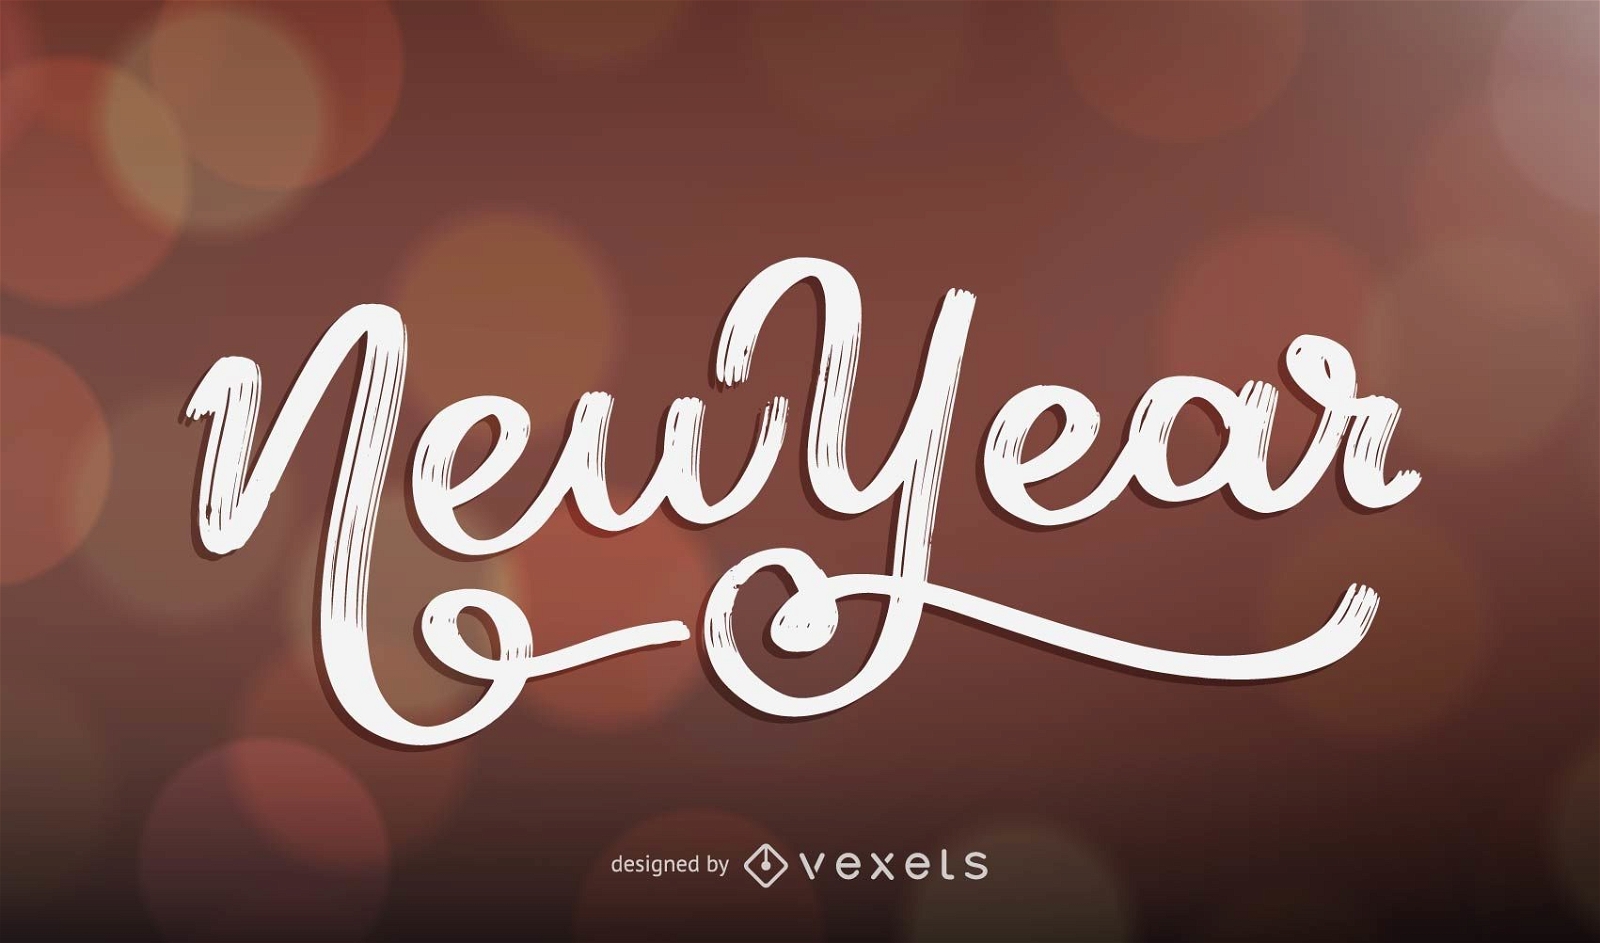 New Year lettering design